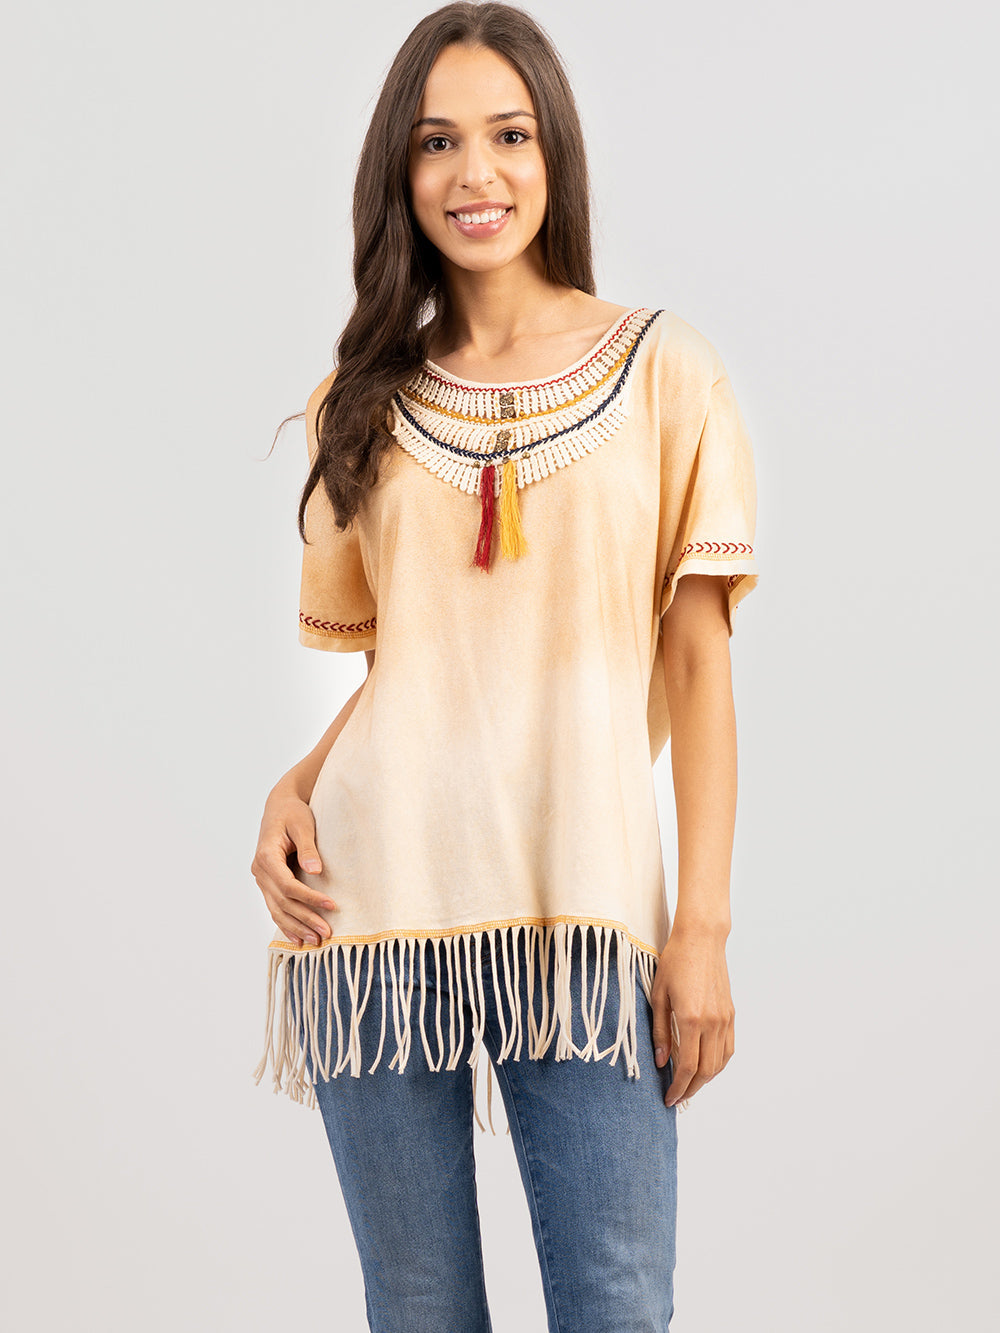 Delila Women’s Fringed Lace collar With Tassel Tee - Montana West World